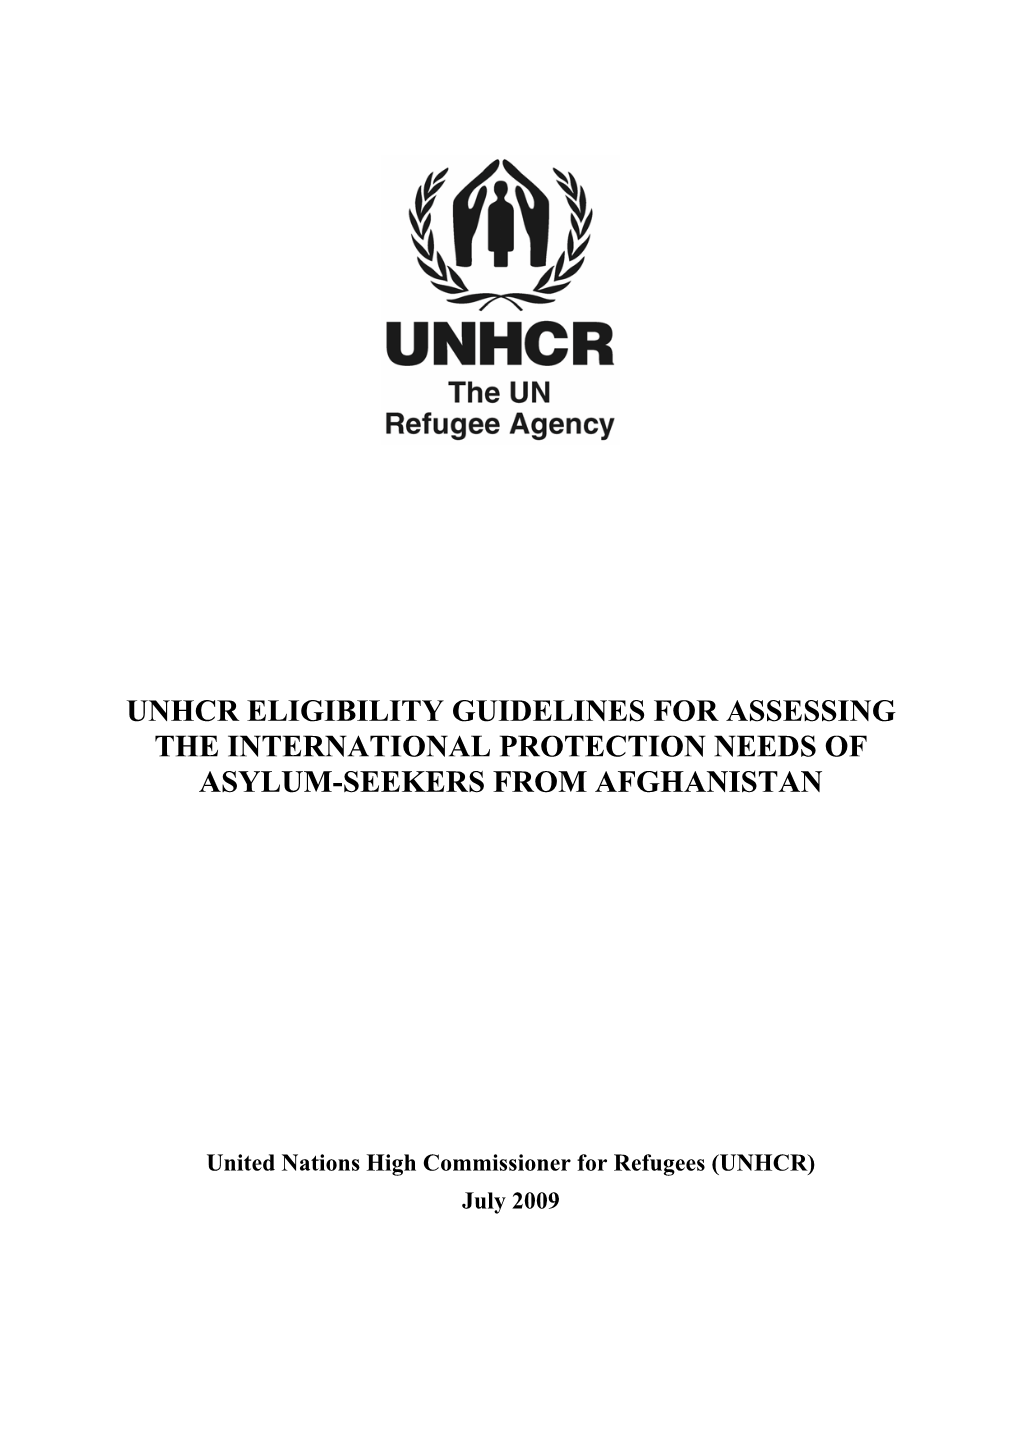 Unhcr Eligibility Guidelines for Assessing the International Protection Needs of Asylum-Seekers from Afghanistan